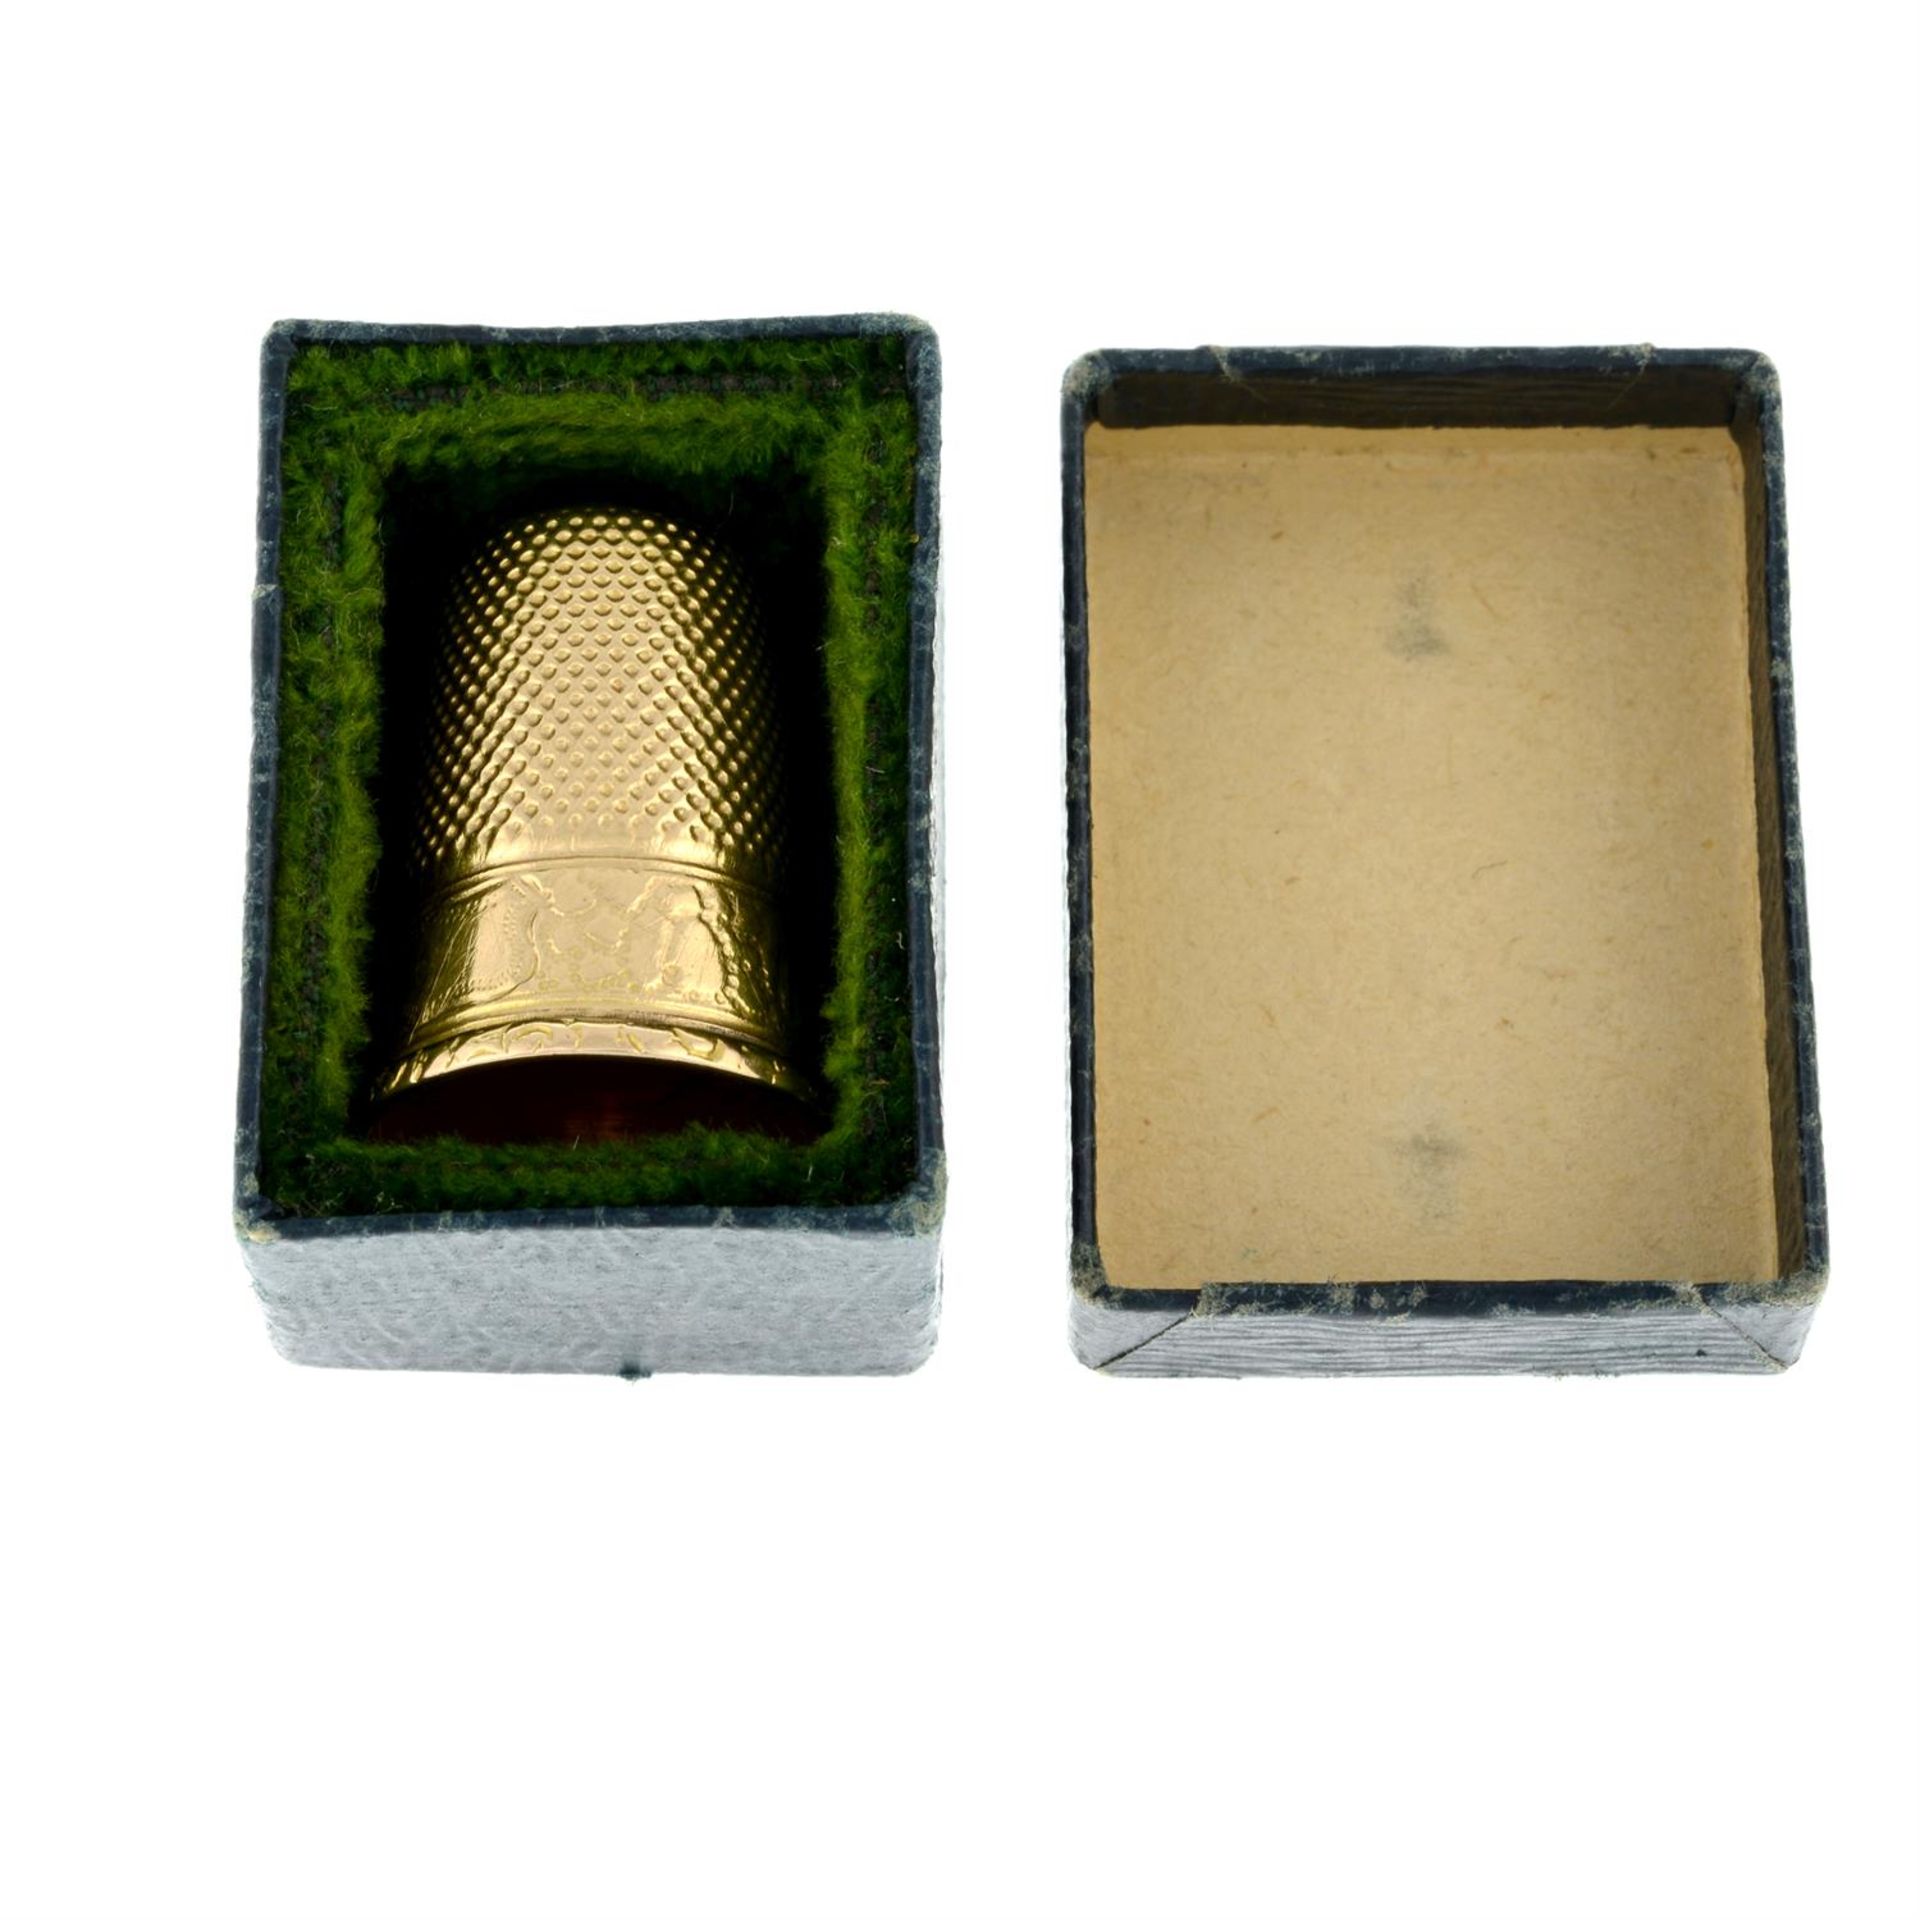 Early 20th century gold thimble. - Image 3 of 3